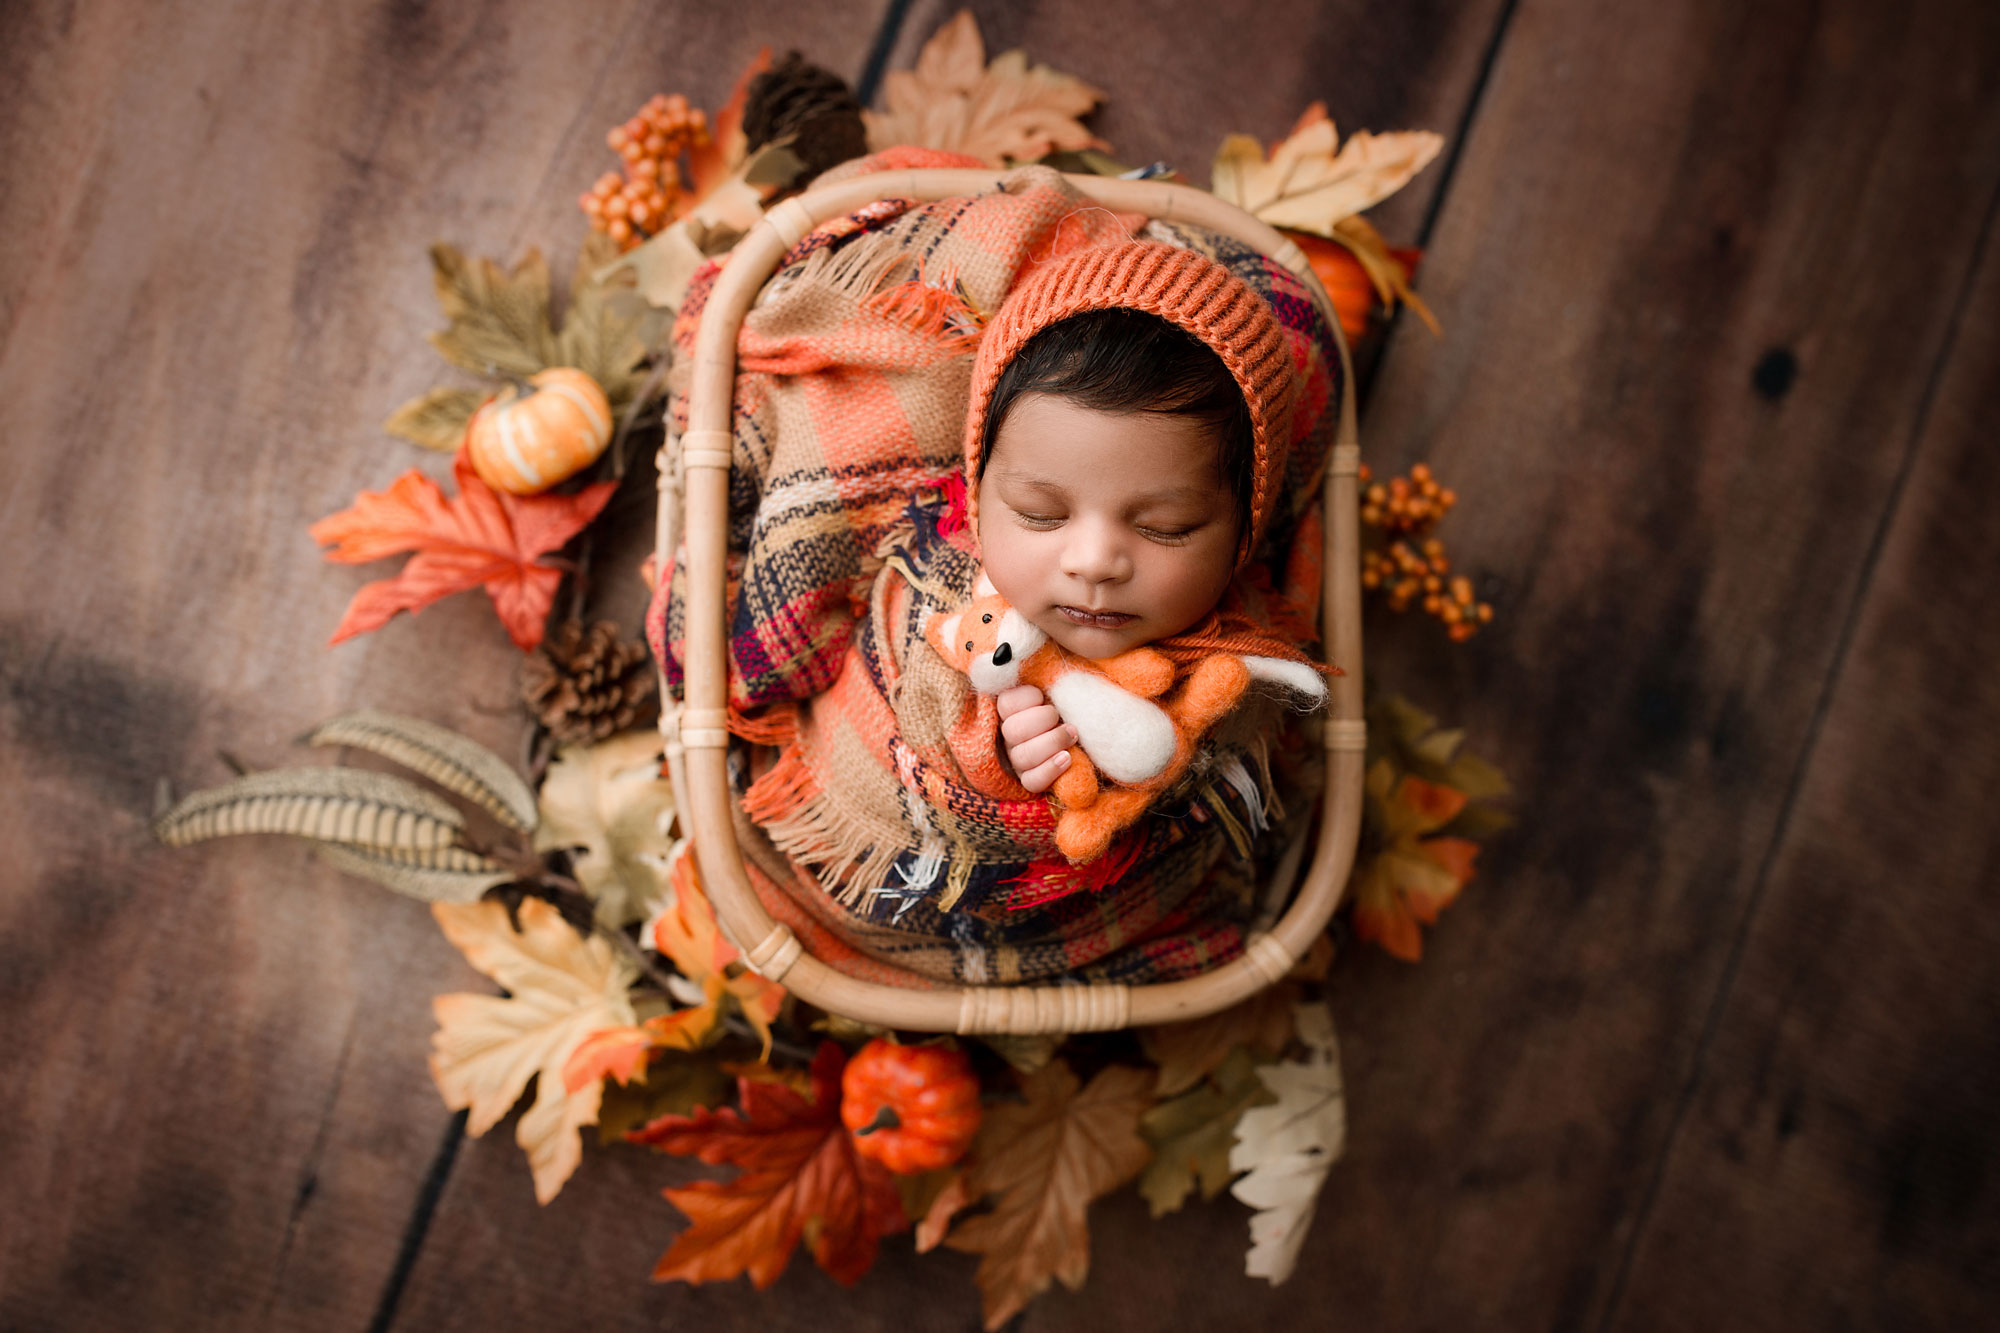 studio newborn photographer, baby asleep in basket with fox toy and autumn leaves